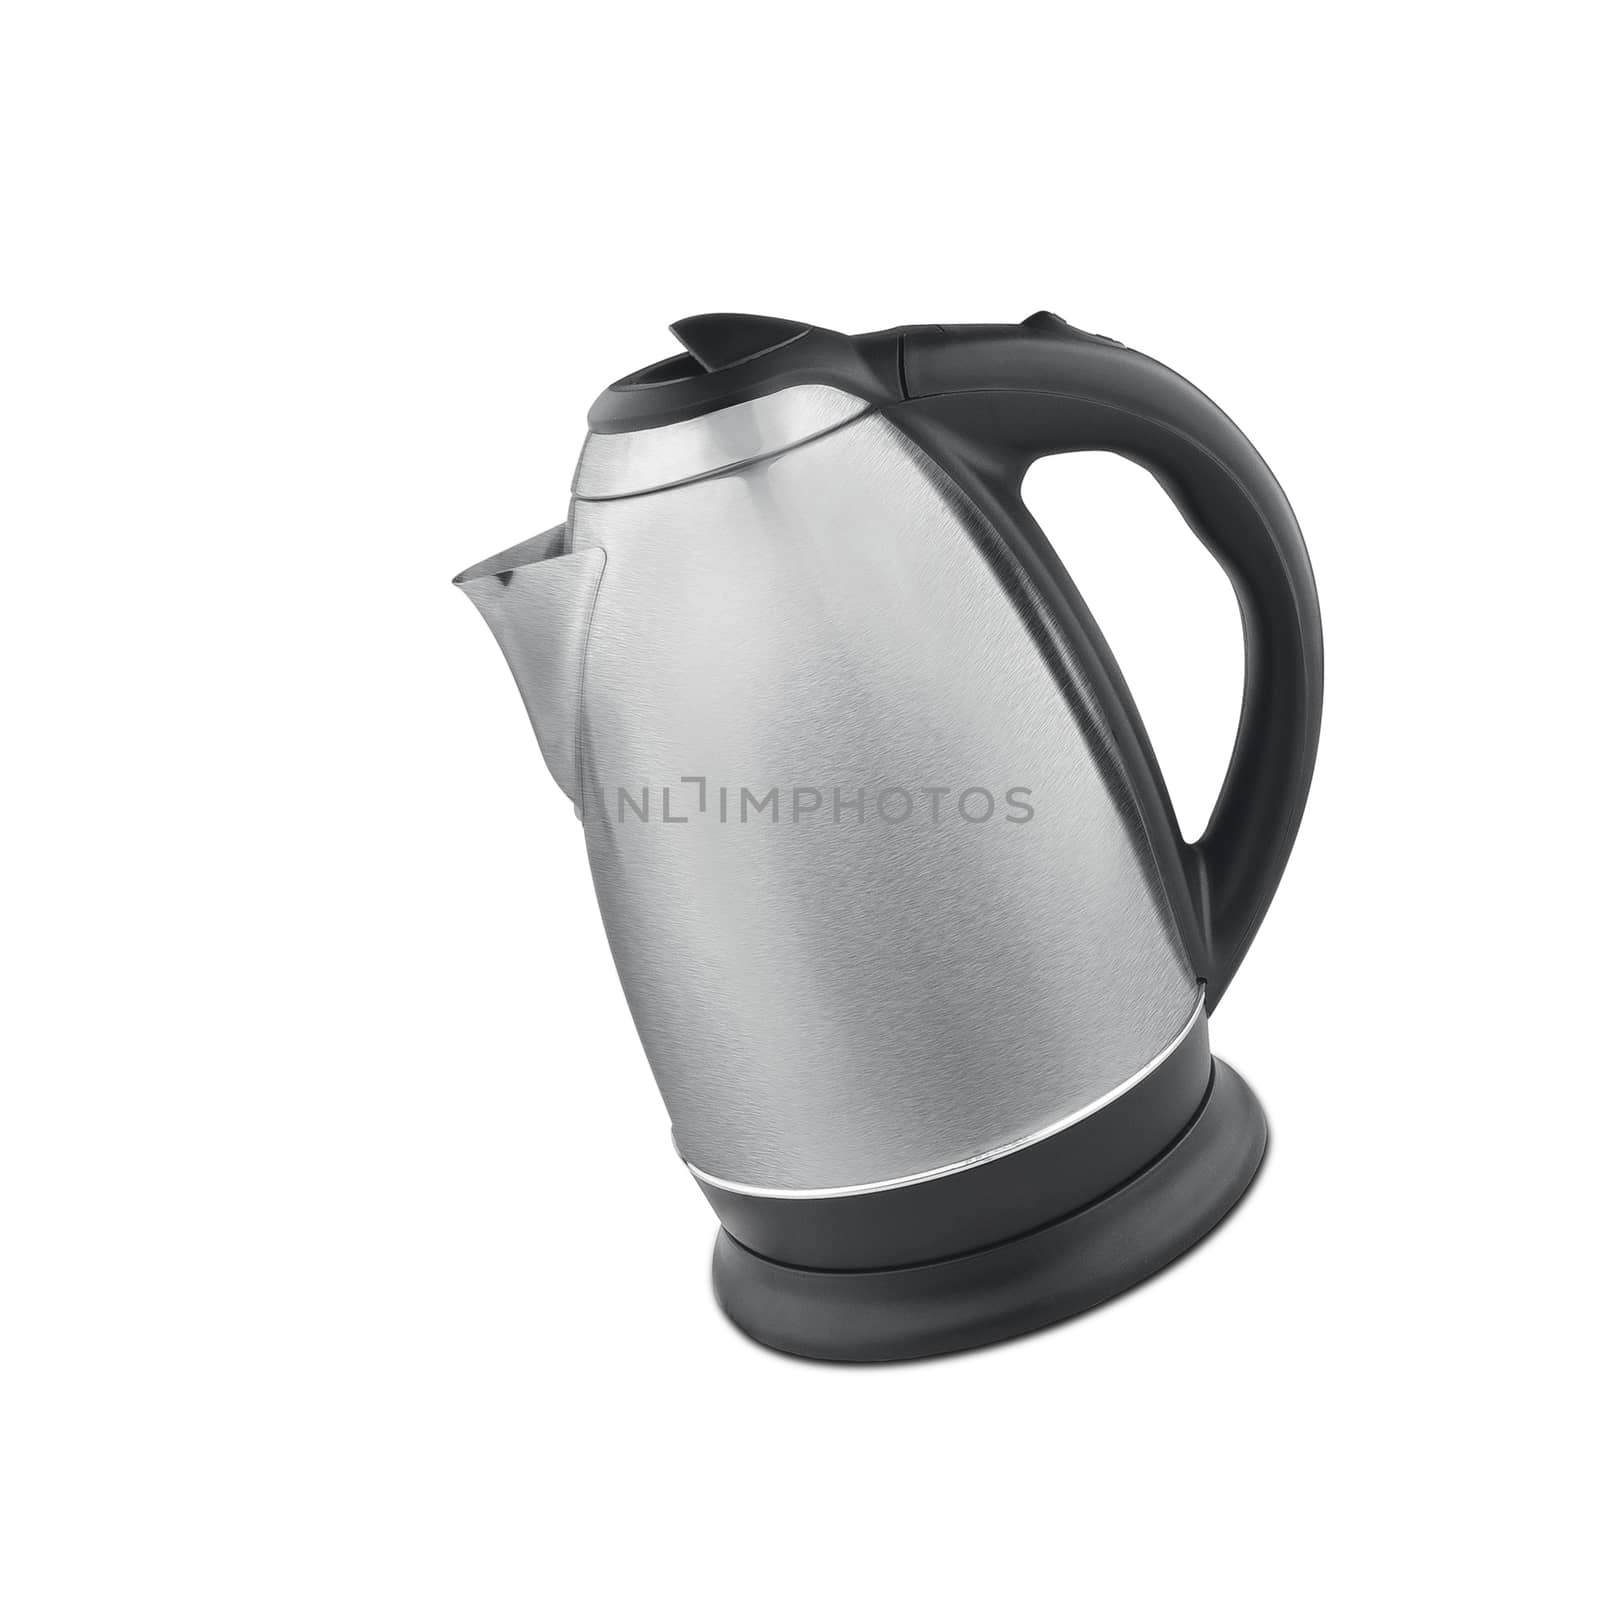 Stainless steel electric kettle isolated